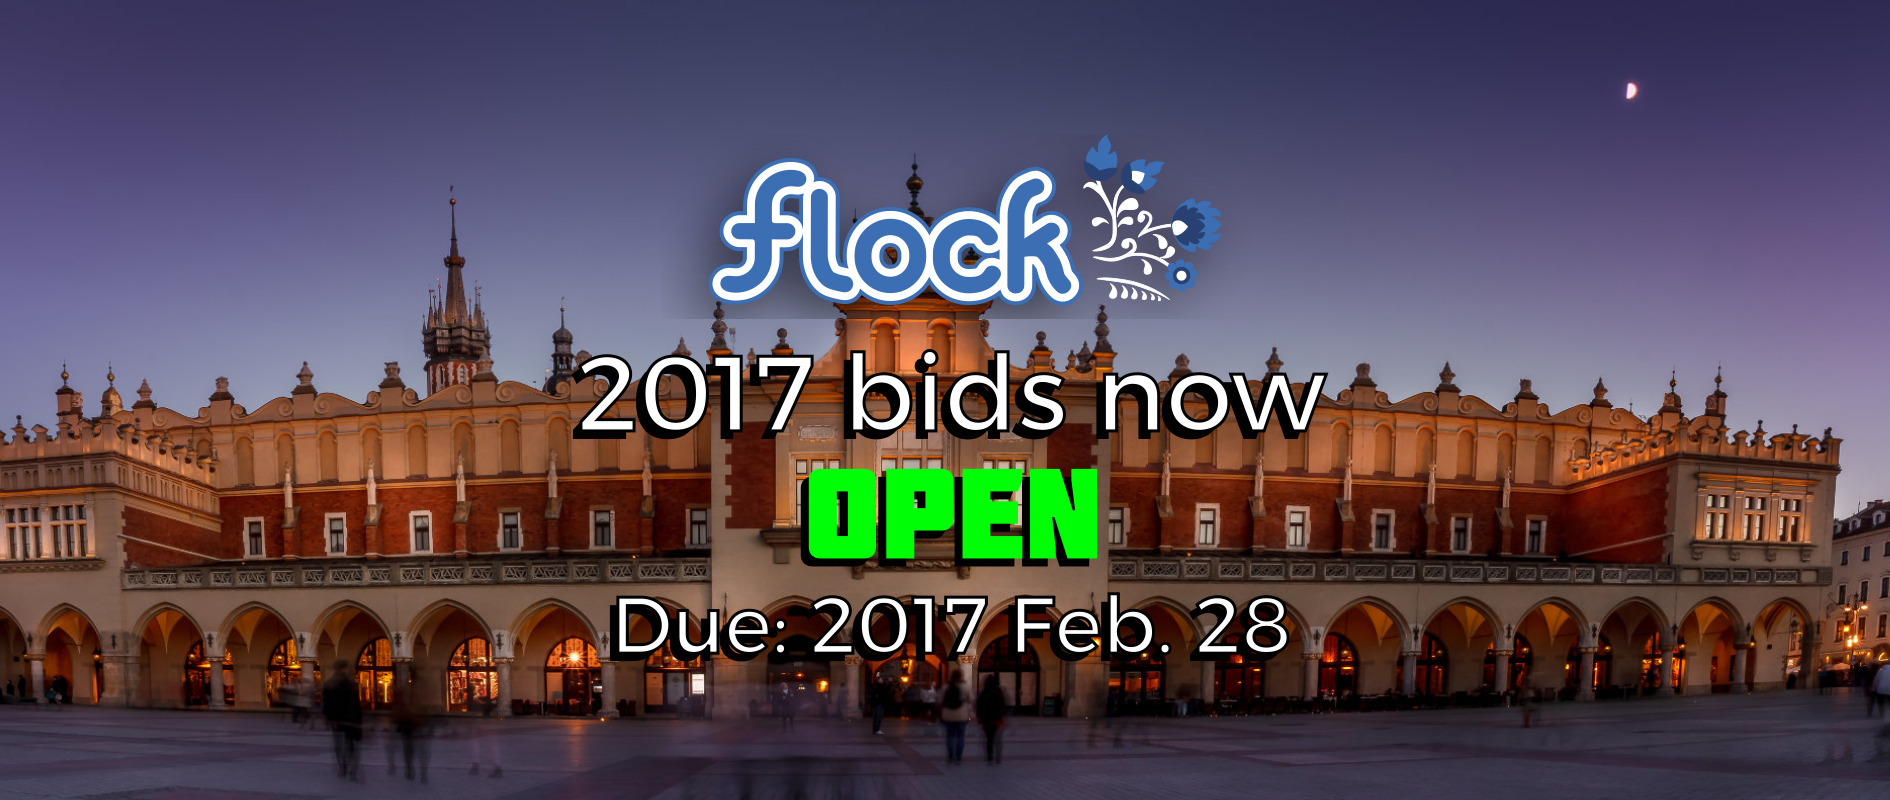 Flock 2017 bids are now being accepted (due 28 Feb 2017)